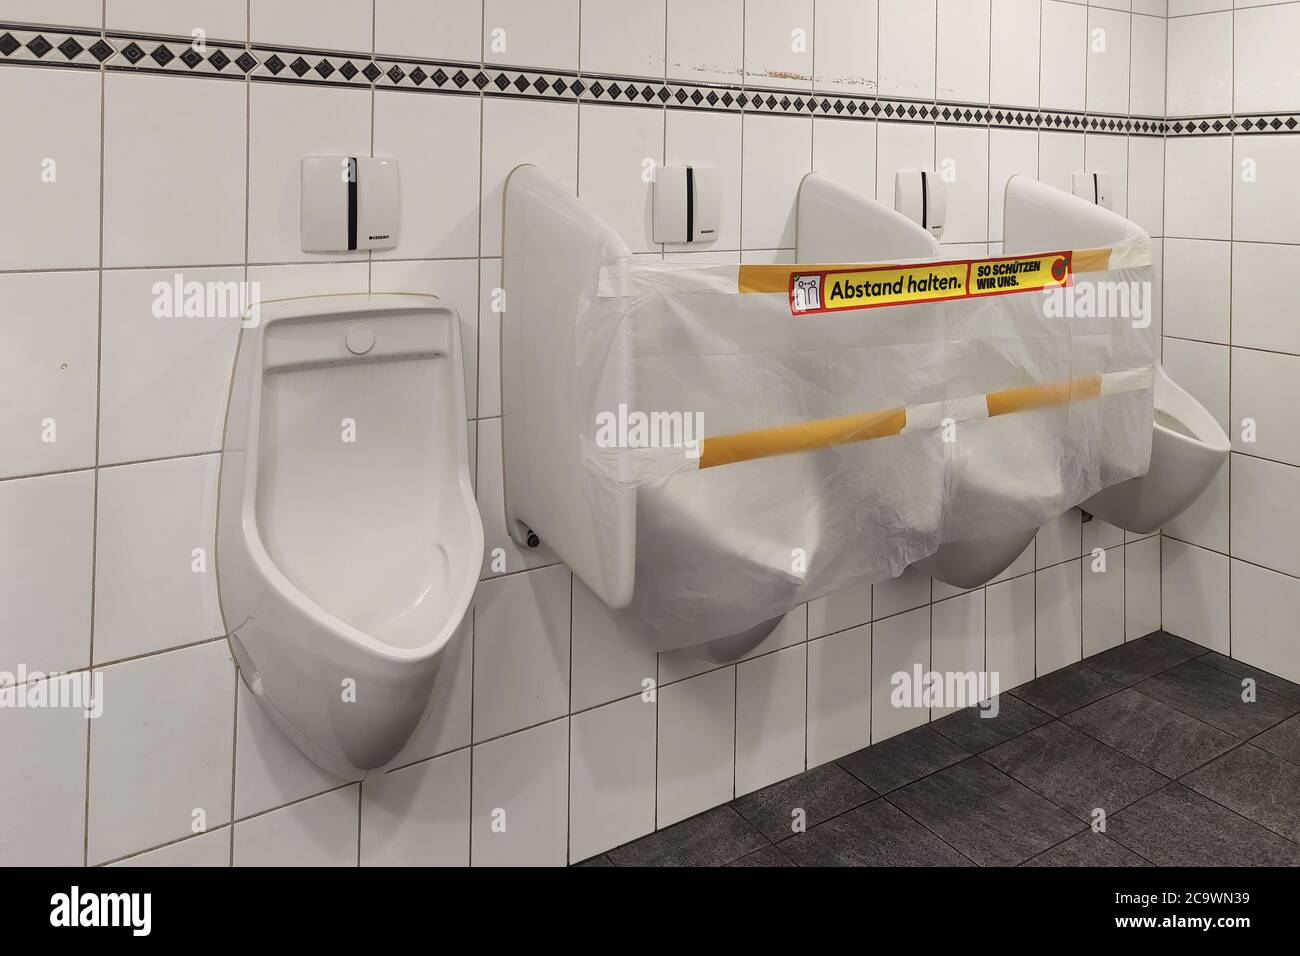 Plastic Urinal High Resolution Stock Photography and Images - Alamy